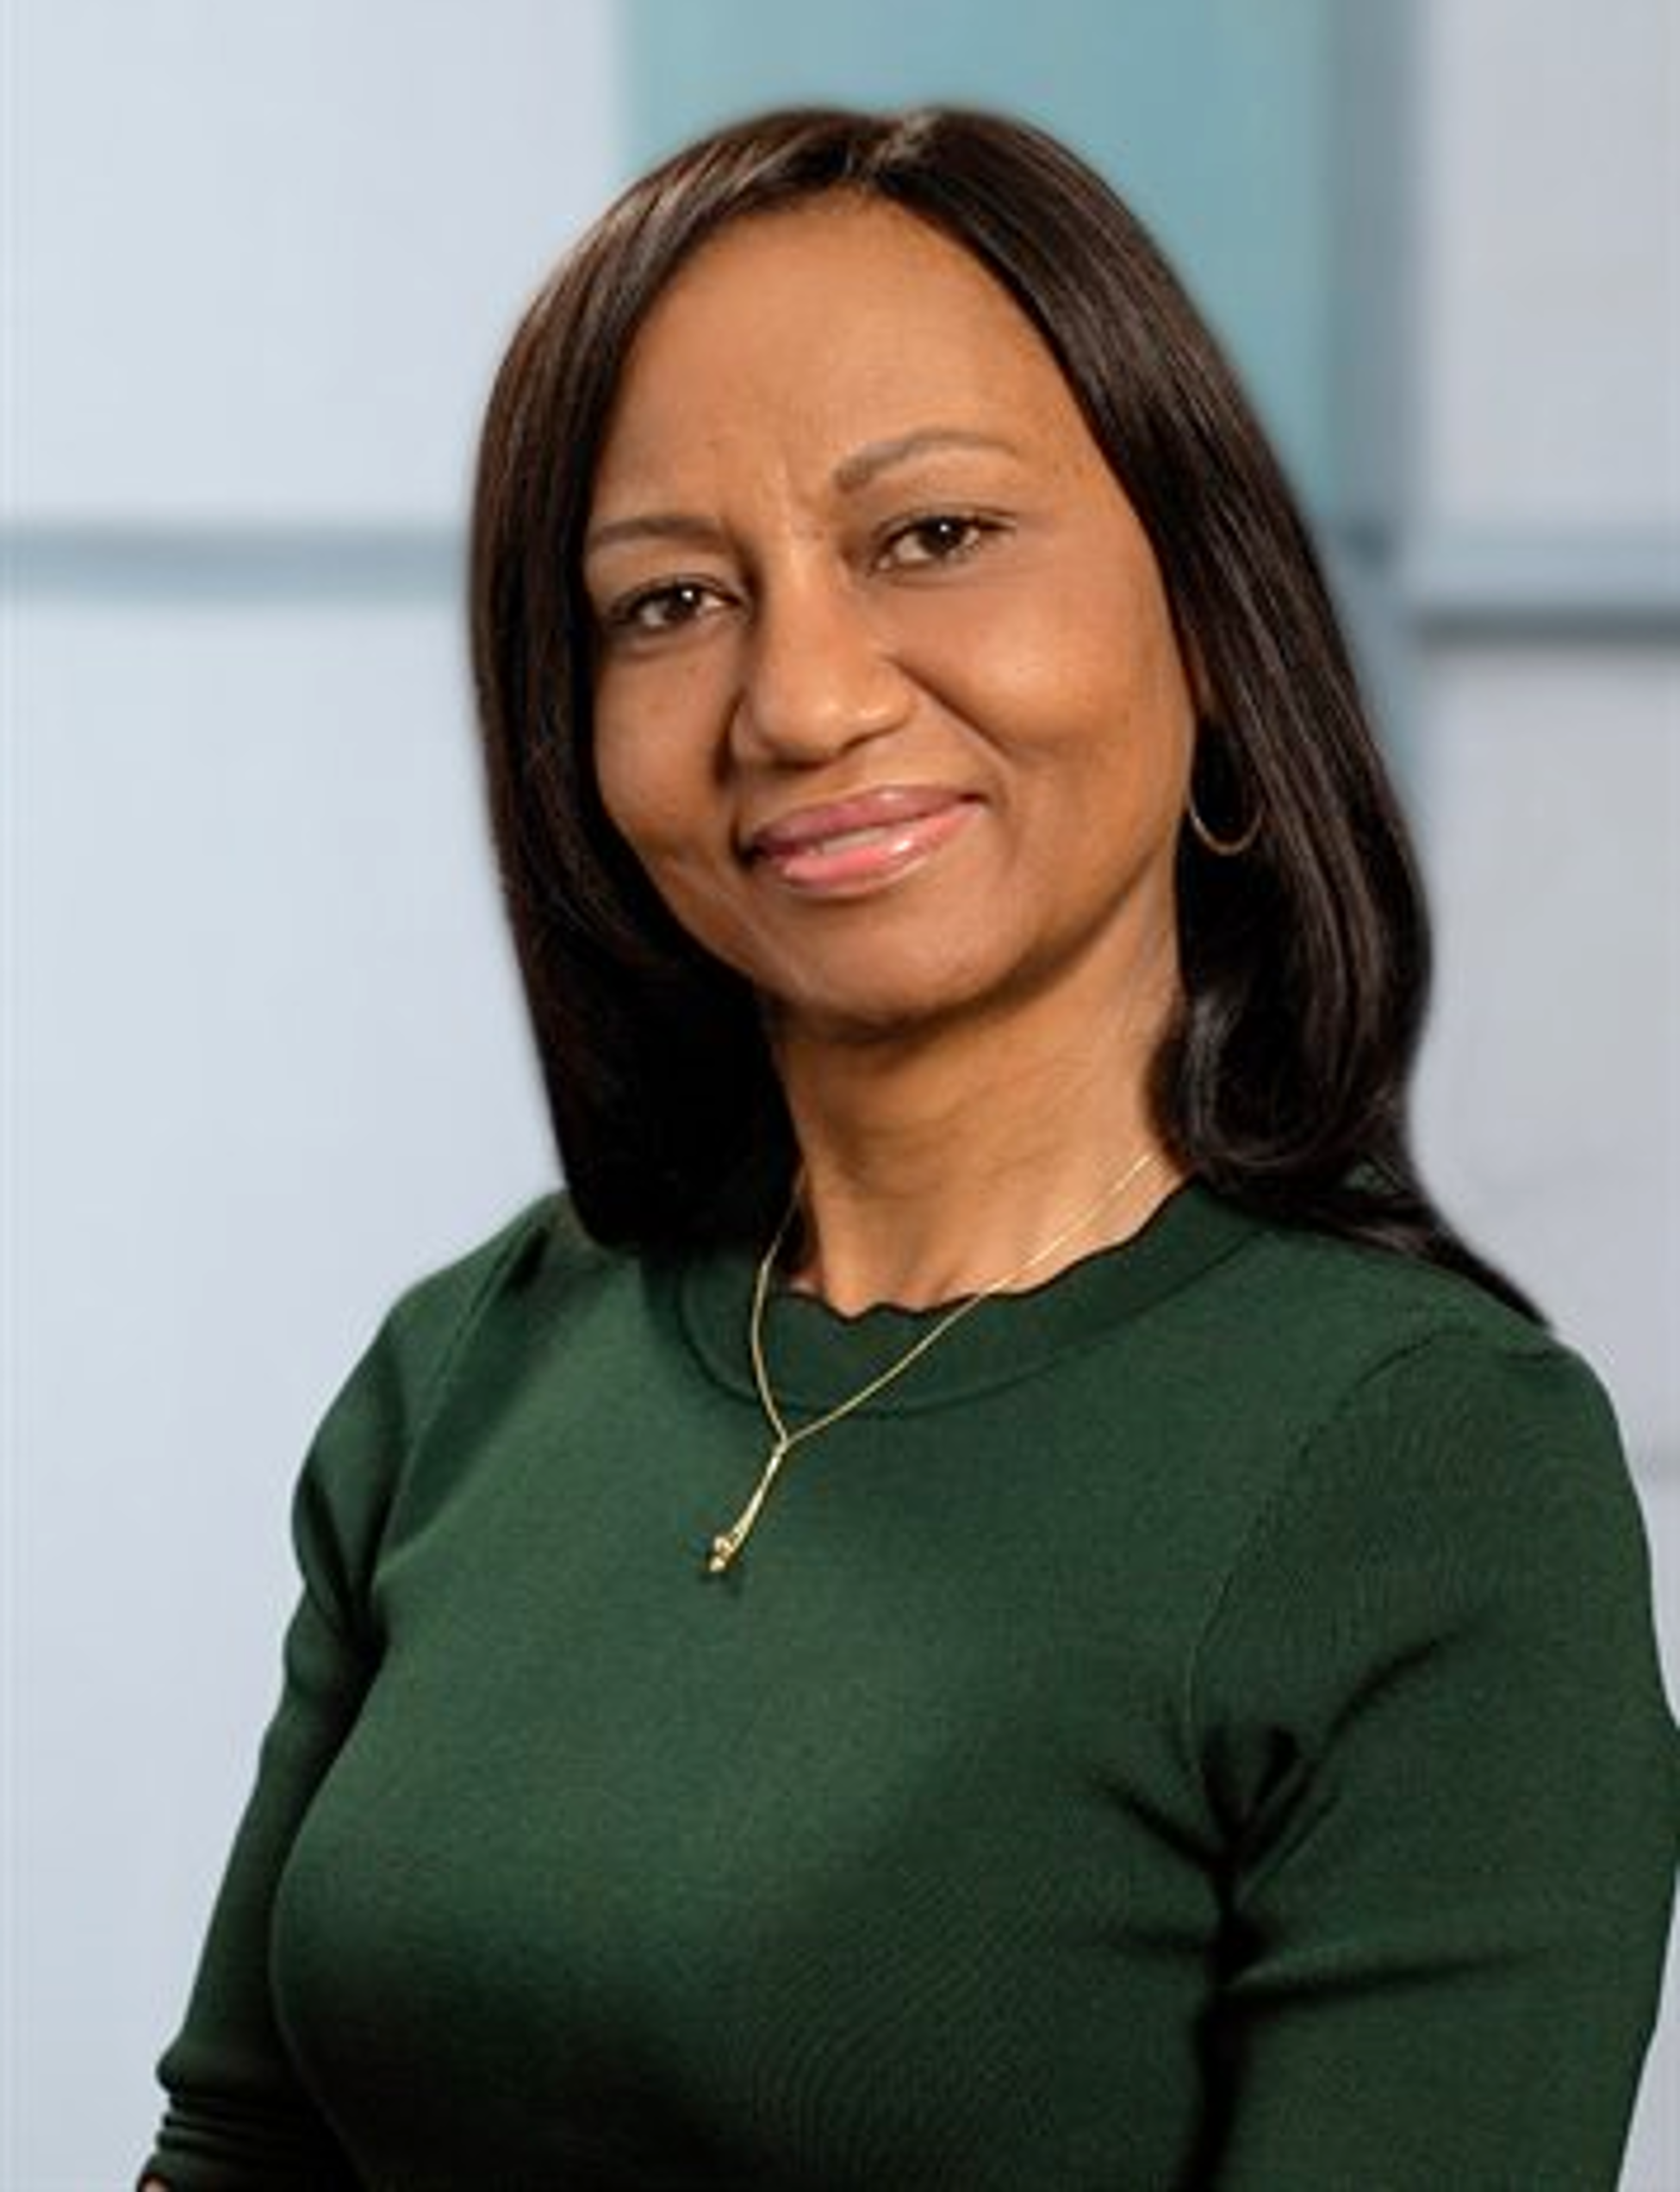 Building a More Inclusive Economy: Q&A with JPMorgan Chase’s Thelma Ferguson